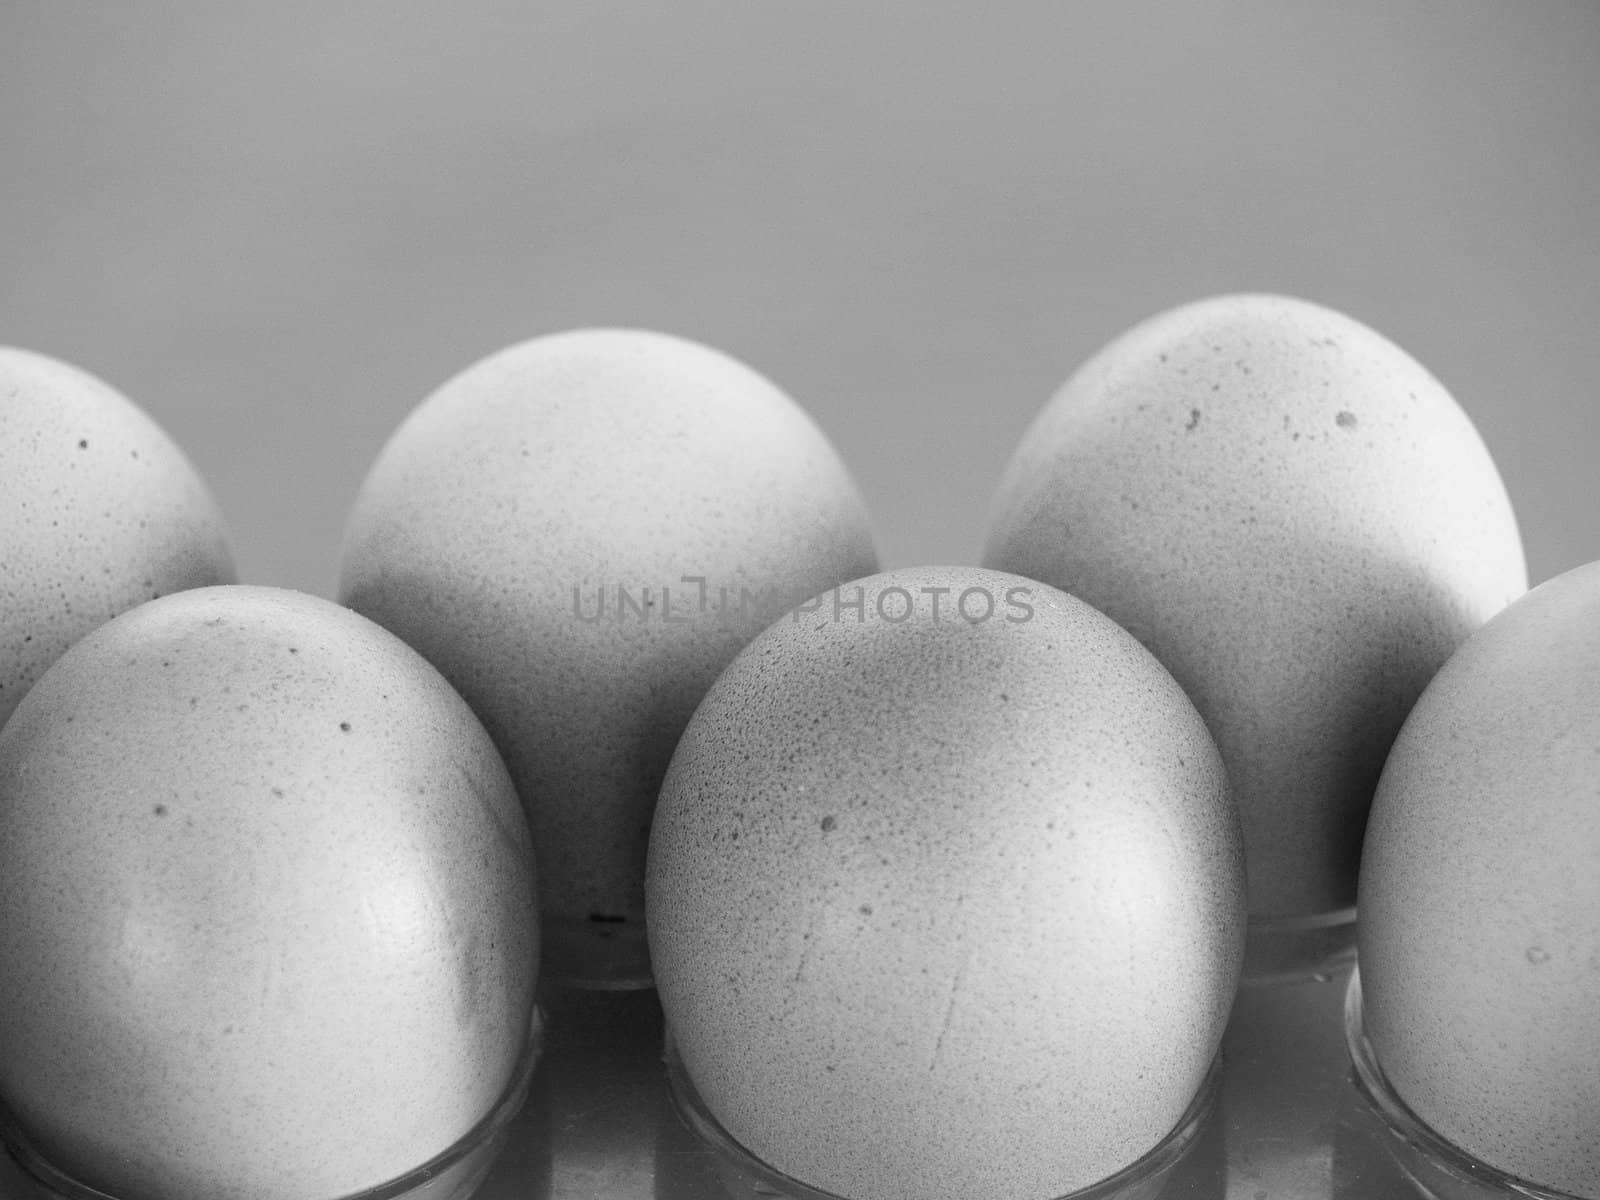 Eggs by lauria